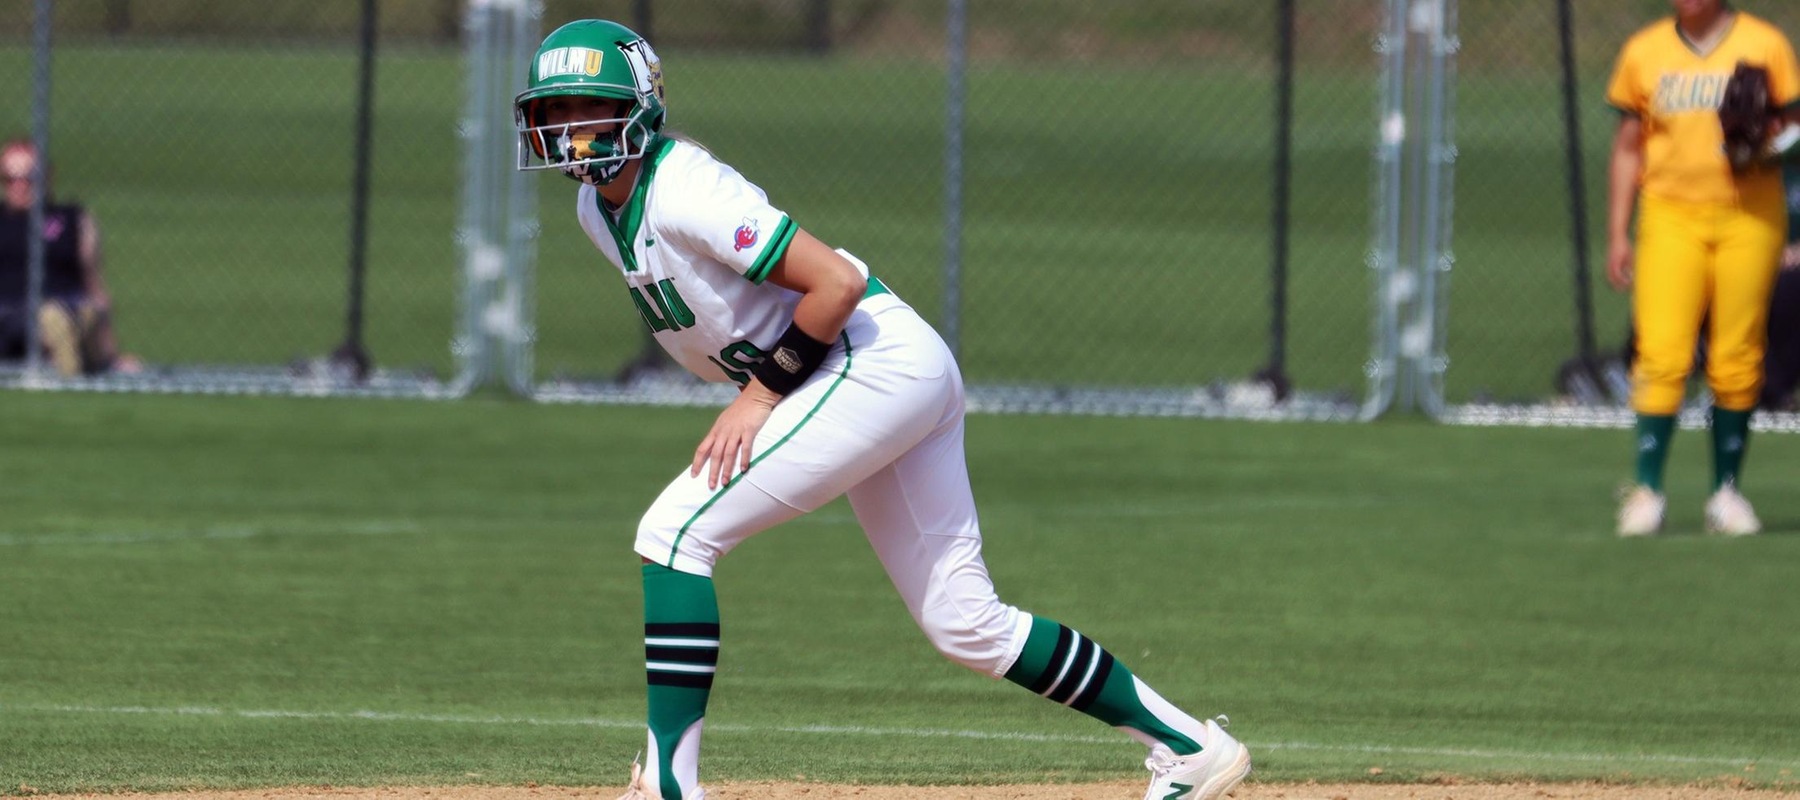 File photo of Sara Miller who batted 4-for-7 with a double and a triple and three RBI in the doubleheader against Jefferson. Copyright 2021; Wilmington University. All rights reserved. Photo by Dan Lauletta. March 27, 2021 at Felician.